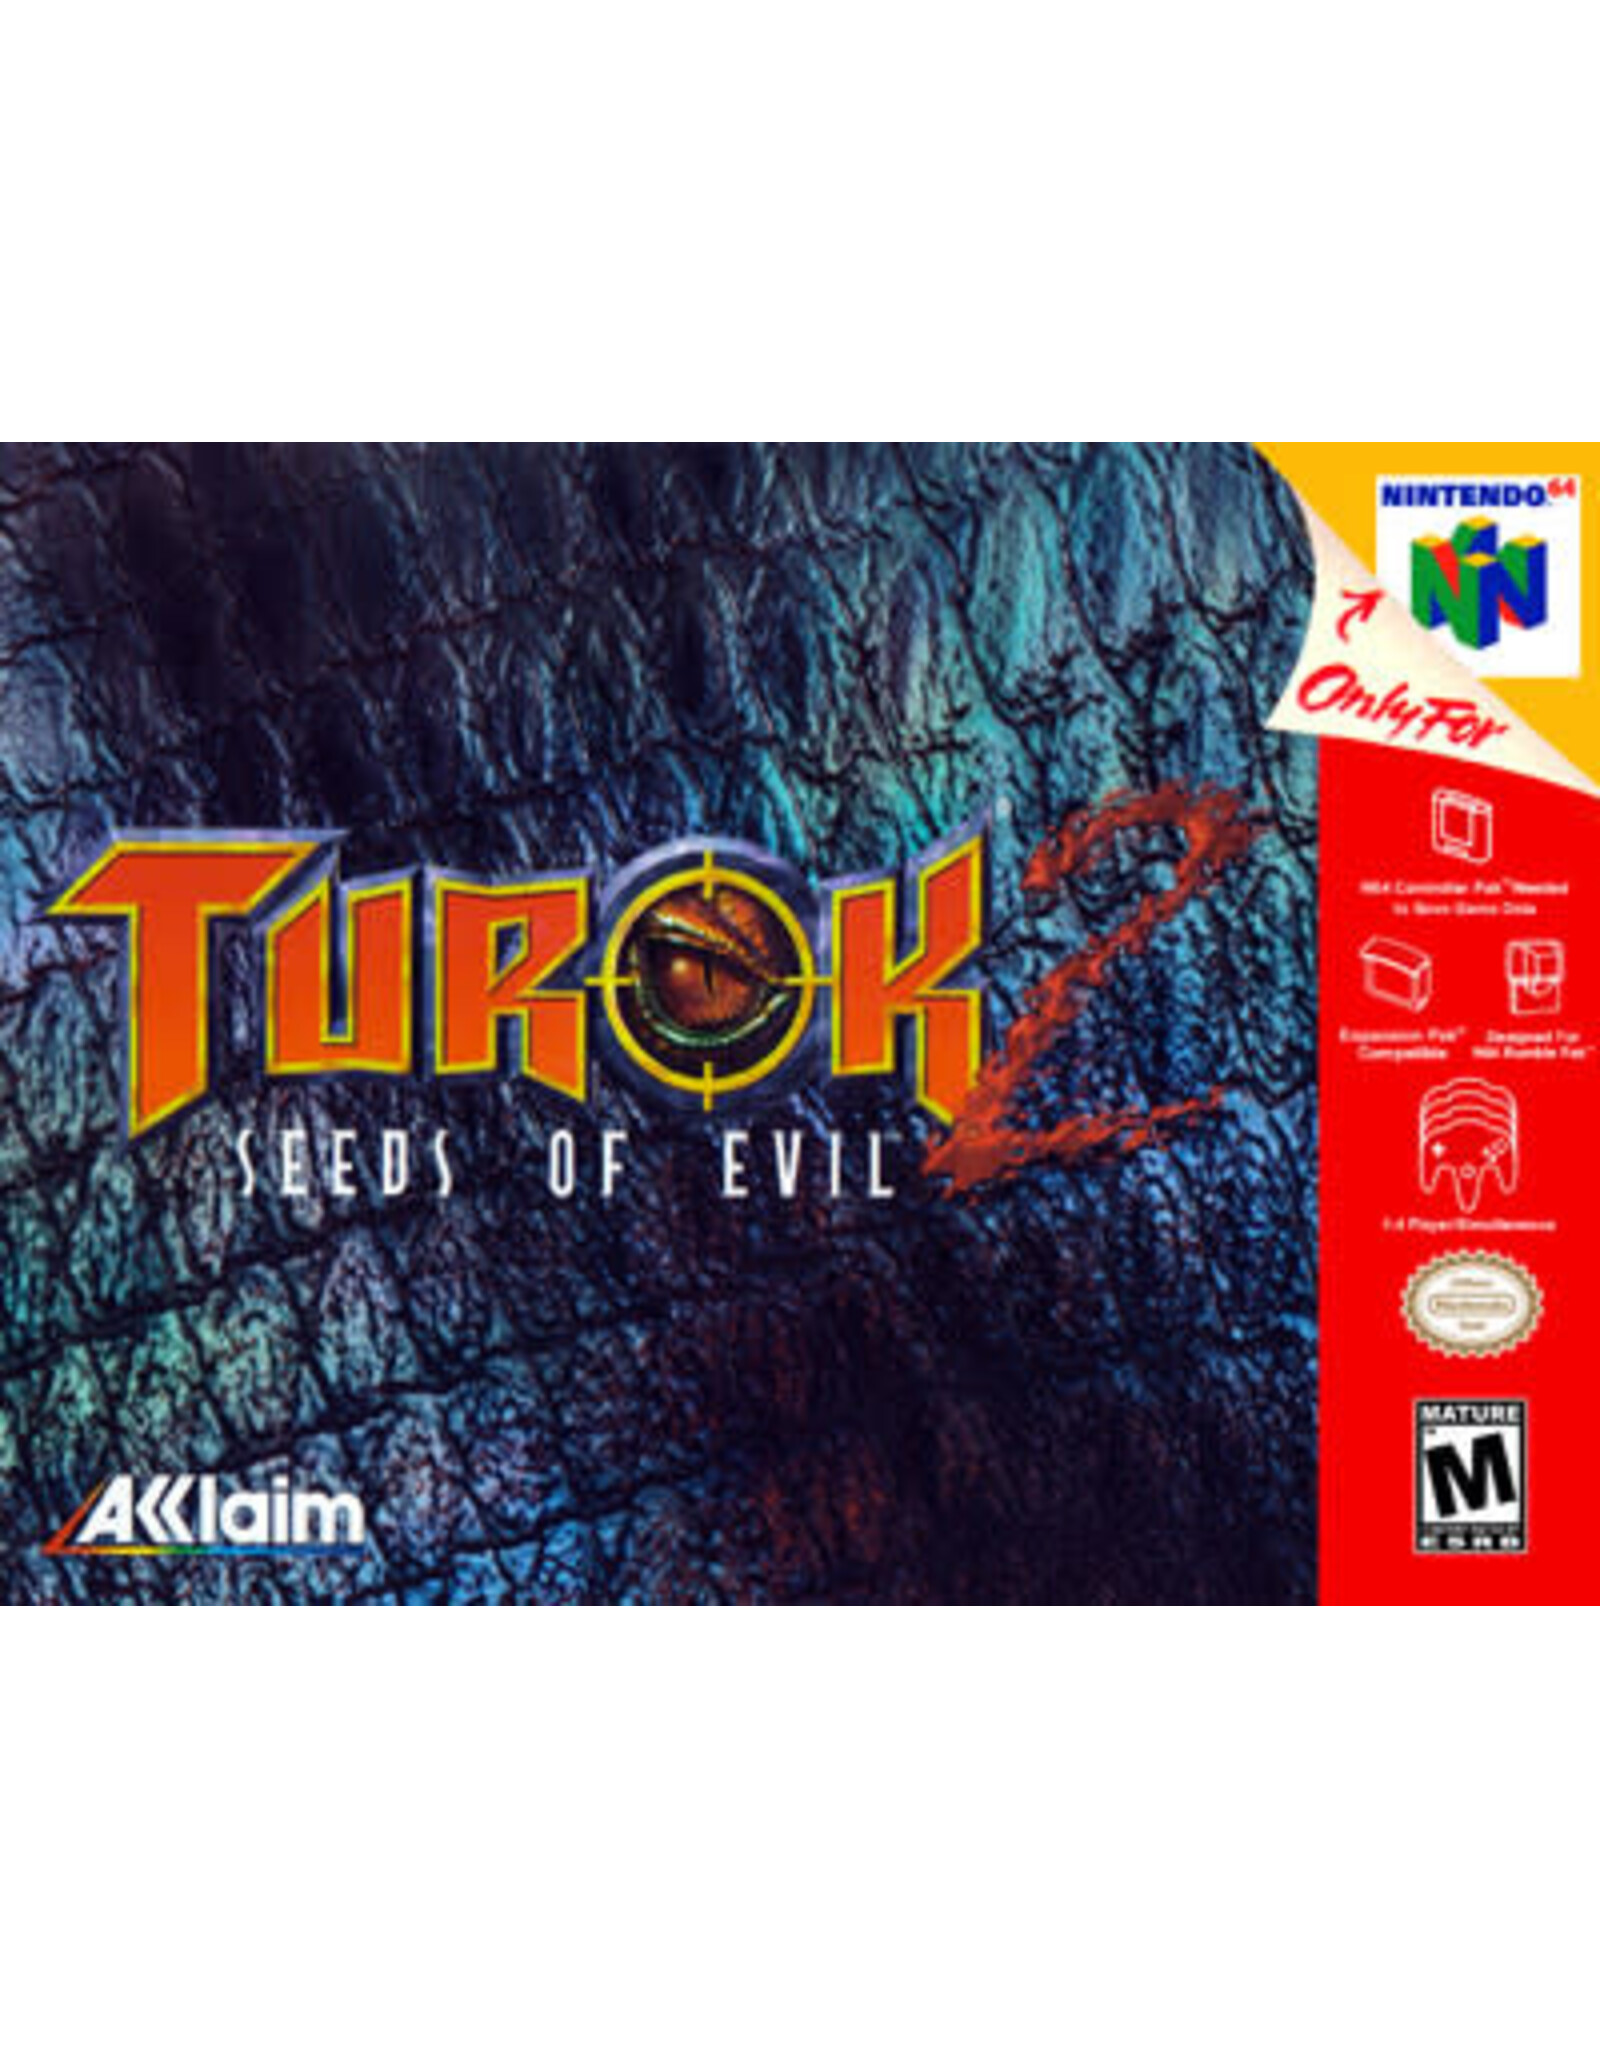 Nintendo 64 Turok 2 Seeds of Evil (Used, Cart Only, Cosmetic Damage)